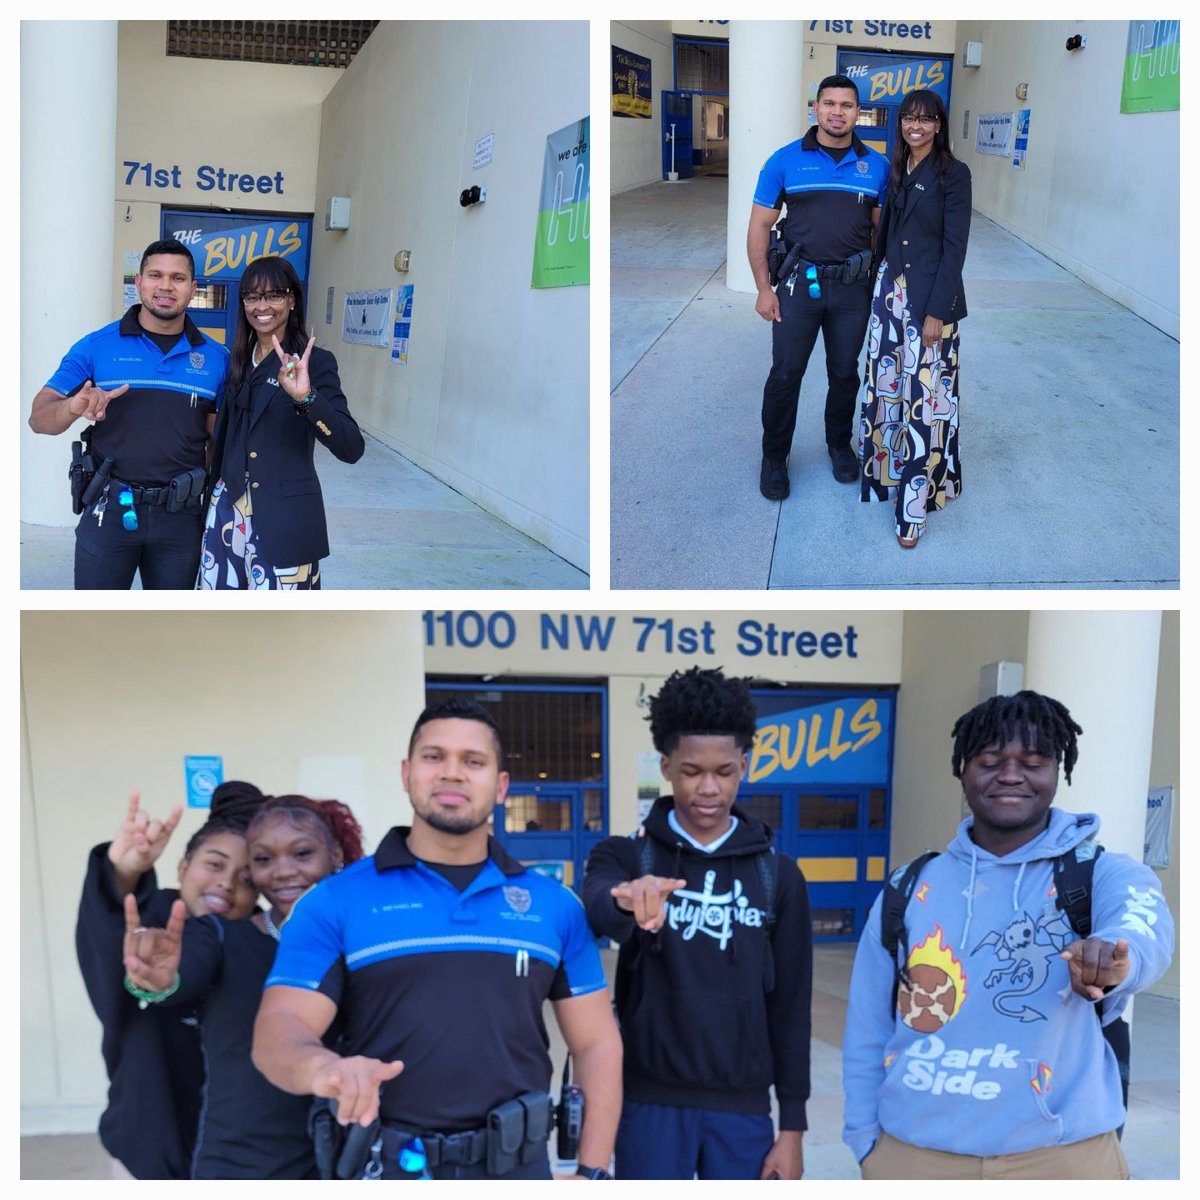 Bull Nation celebrates School Resource Officer Appreciation Day! We appreciate you Officer Lowrey and Officer Wesseling! 💙🤘🏾 @MDCPS @MDCPSCentral @SuptDotres #mdcpsyourbestchoice